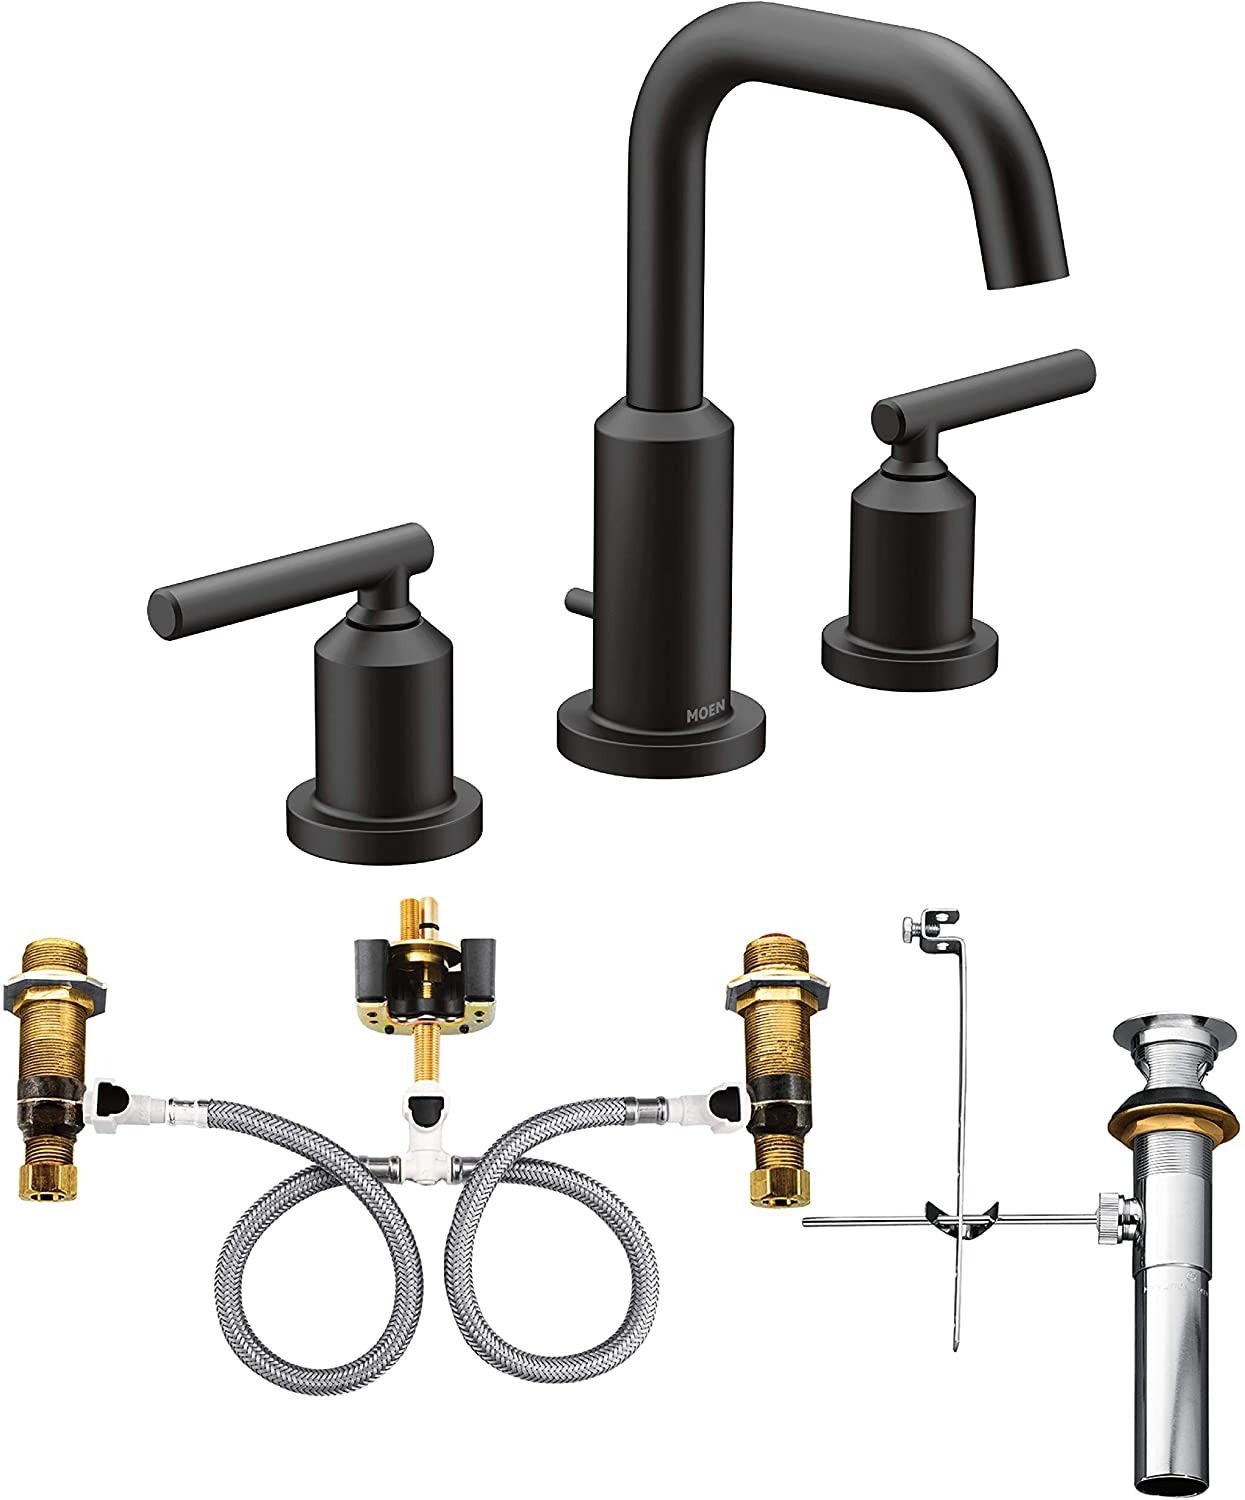 Moen Gibson Two-Handle Widespread Bathroom Faucet w/ Rough-In Valve (Matte Black) $188.85 + Free S/H